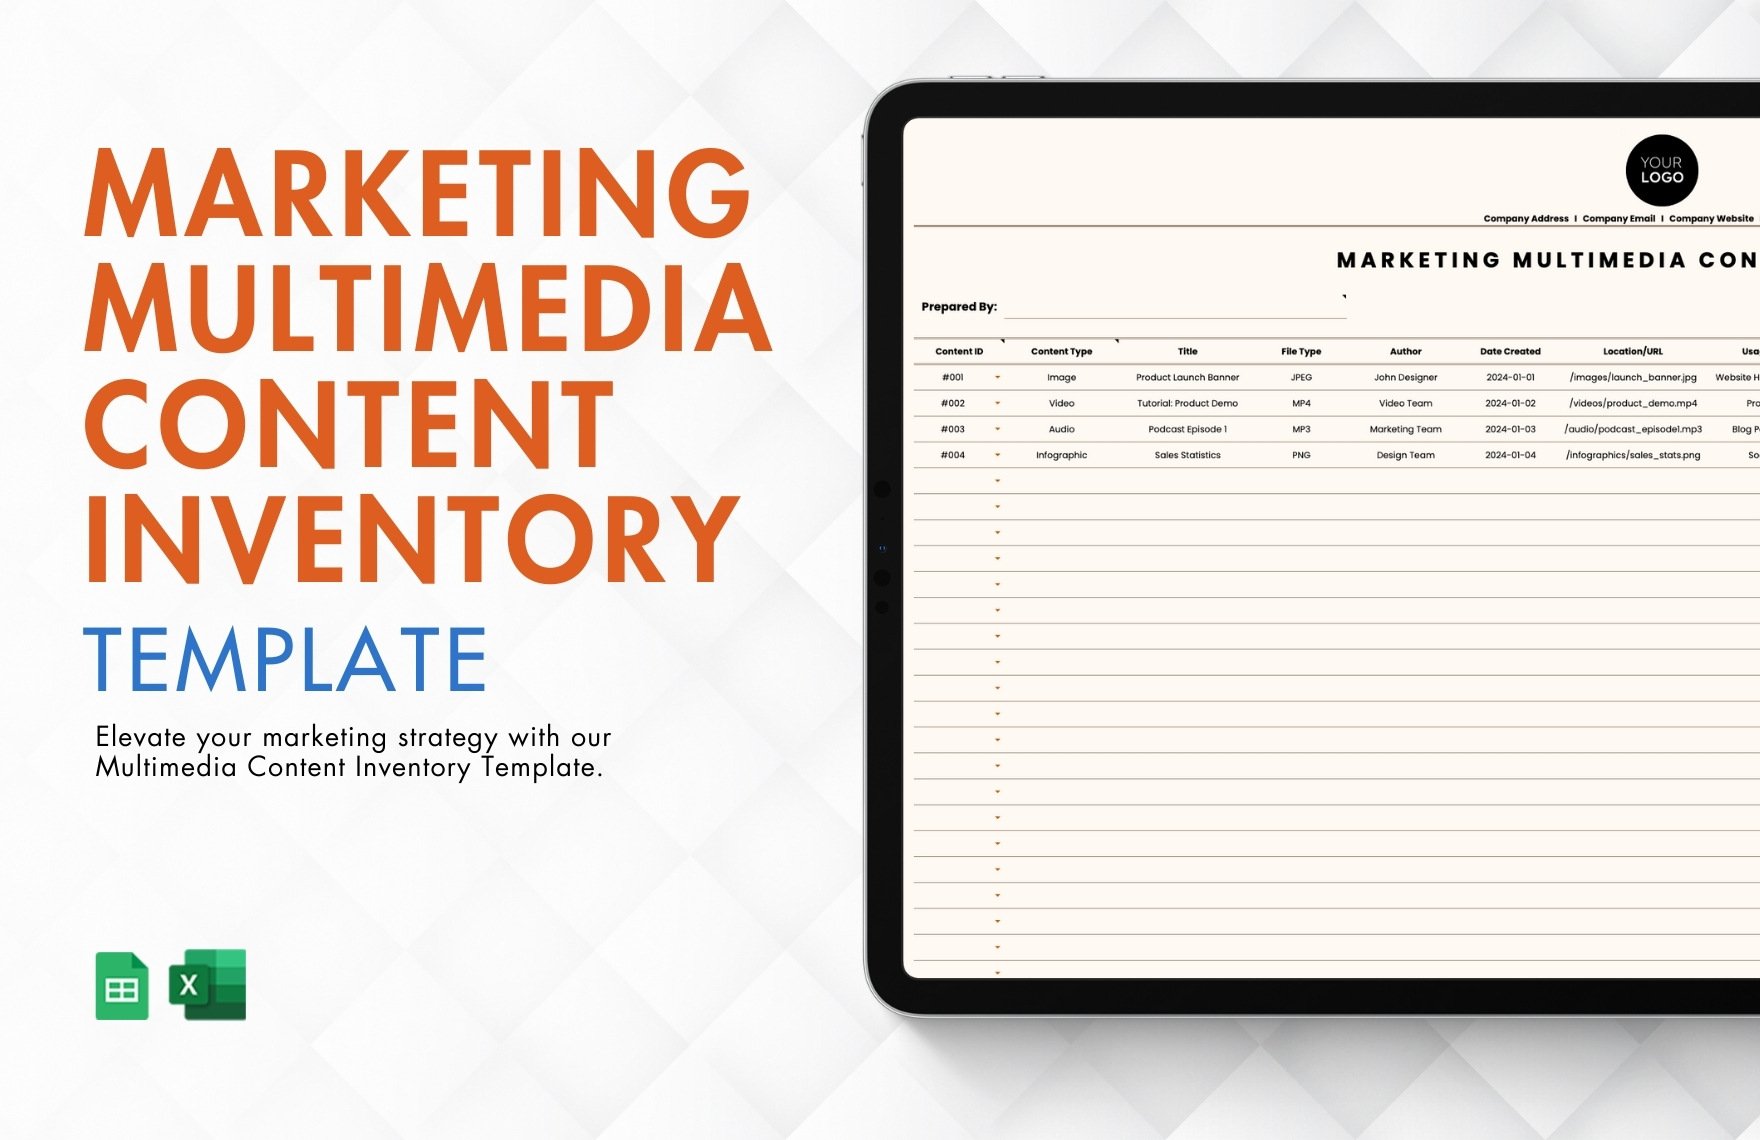 Marketing Multimedia Content Inventory Template